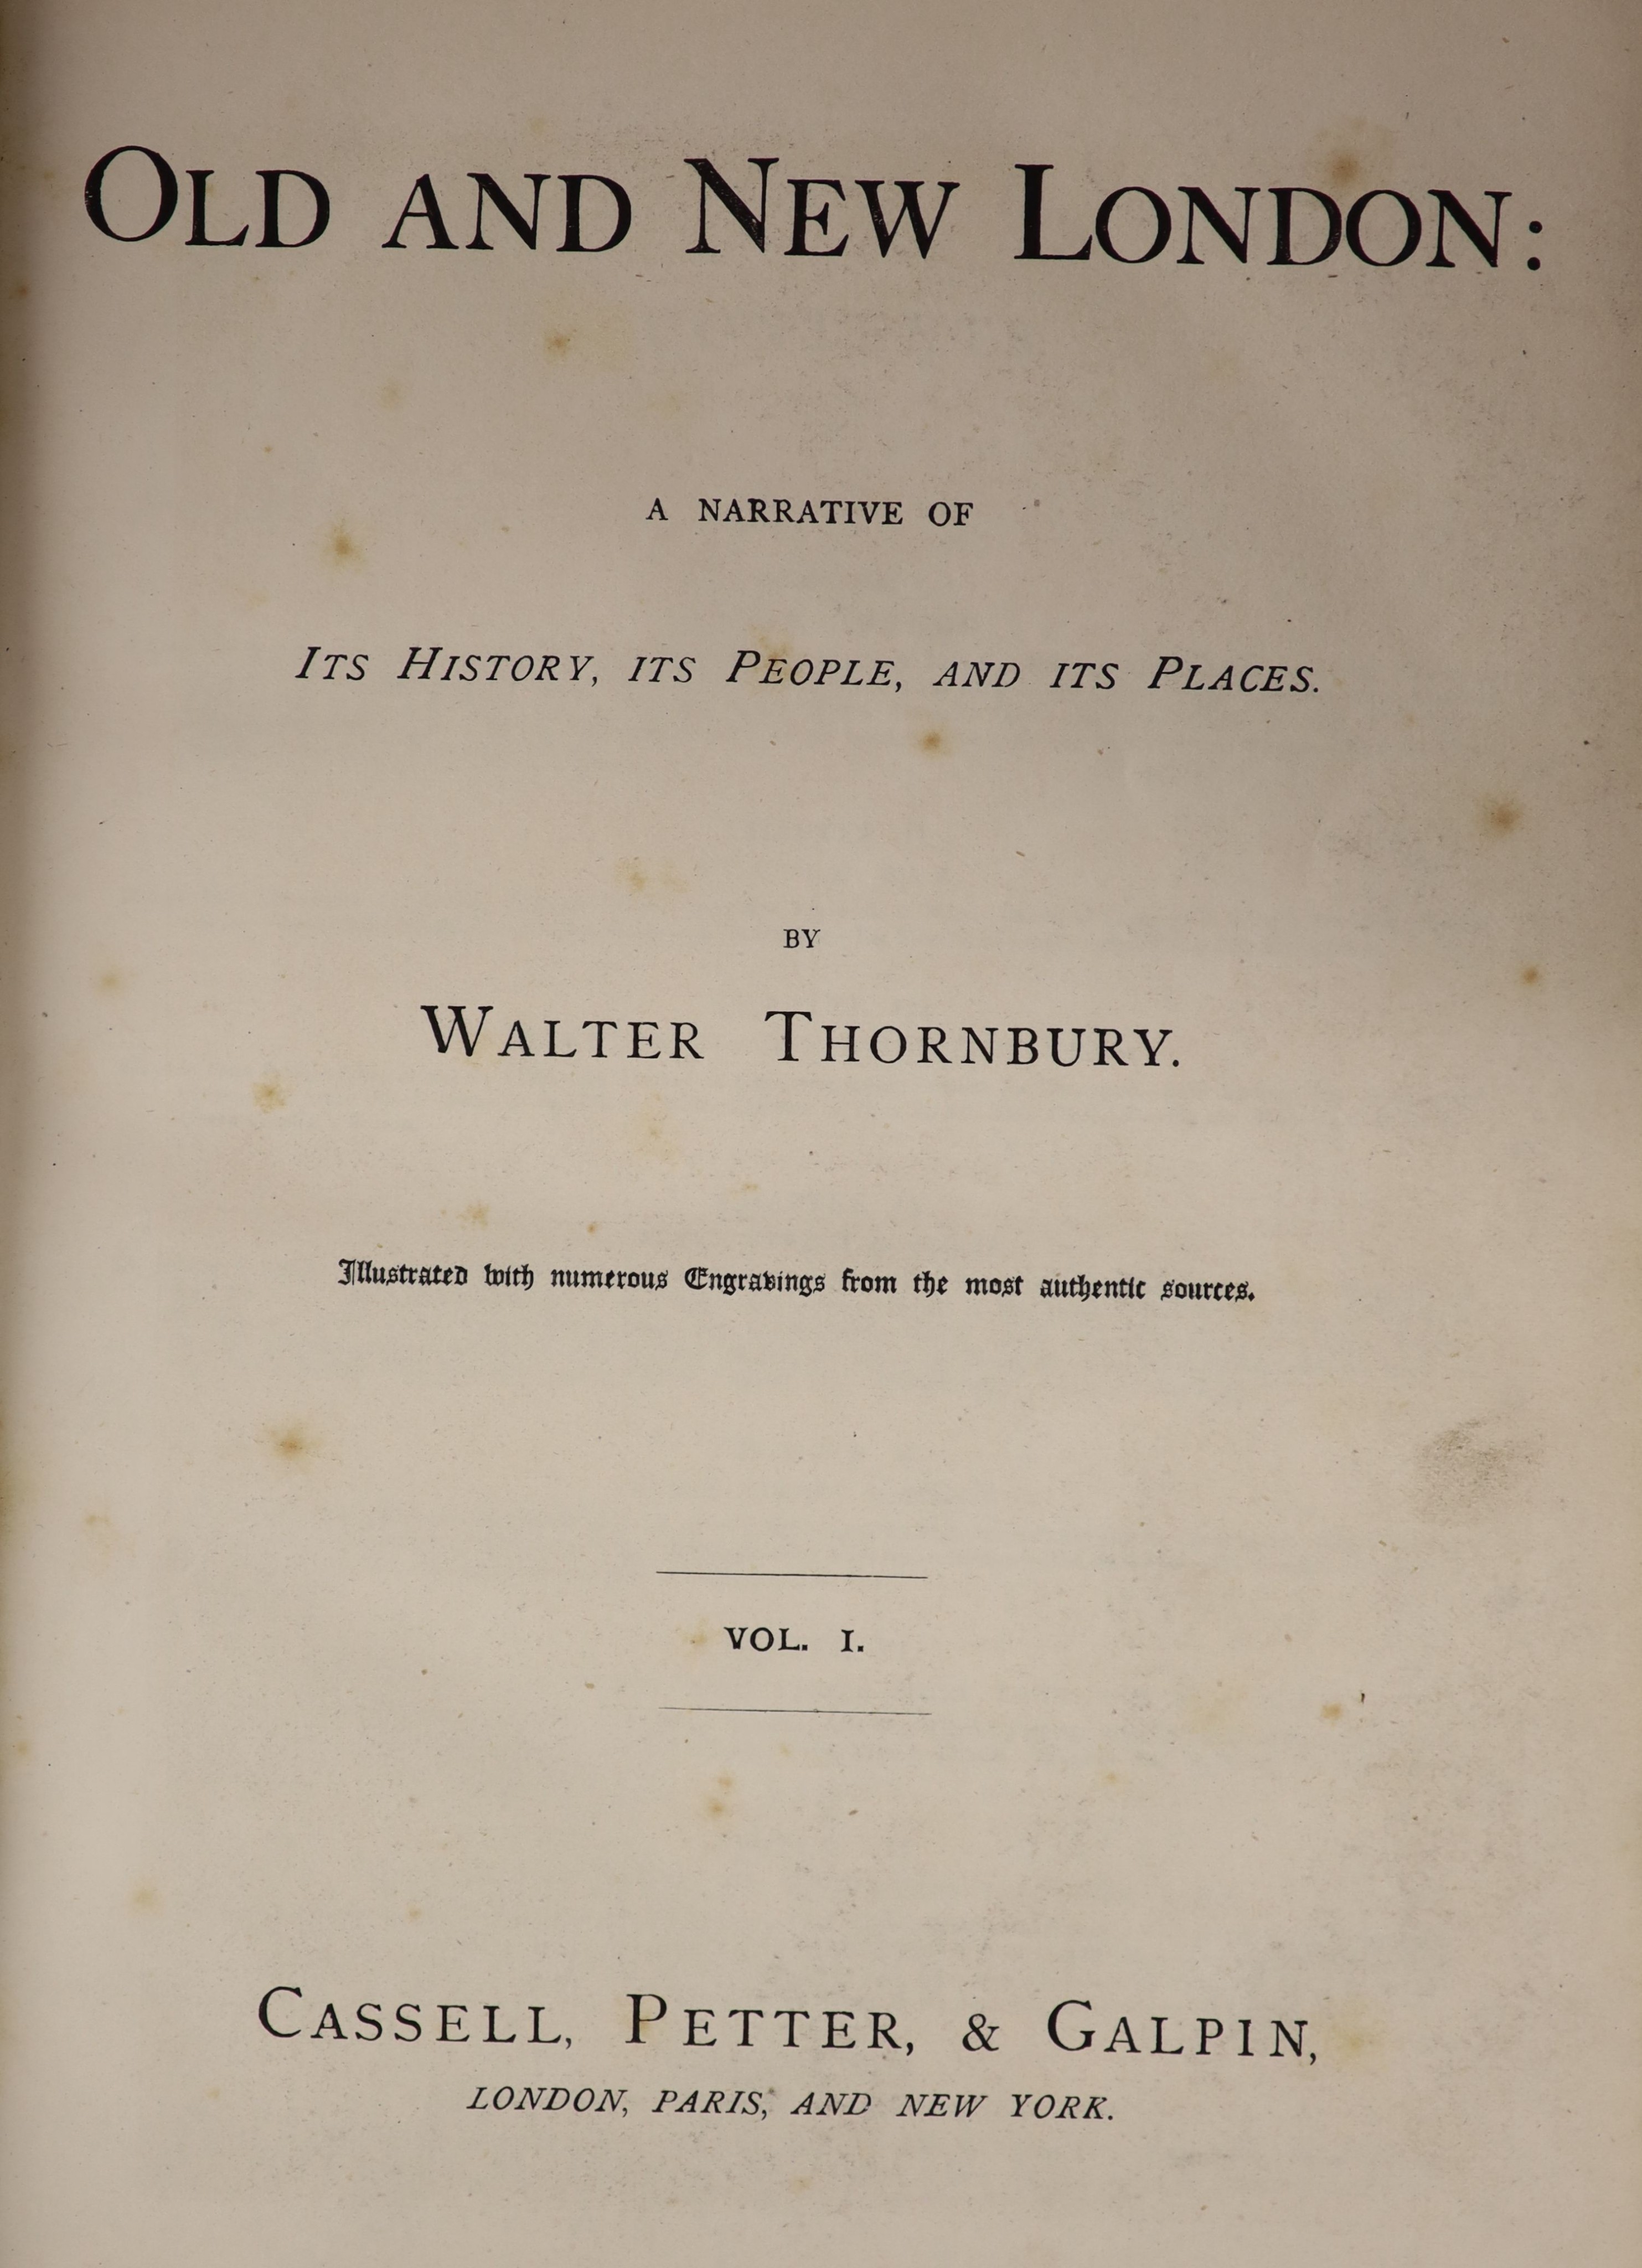 Thornbury, Walter [and] Walford, Edward - Old and New London: A Narrative of its History, its People, and its Places. 6 vols. Frontis to each, plus numerous text illustrations (many full page). Half ruled morocco and peb